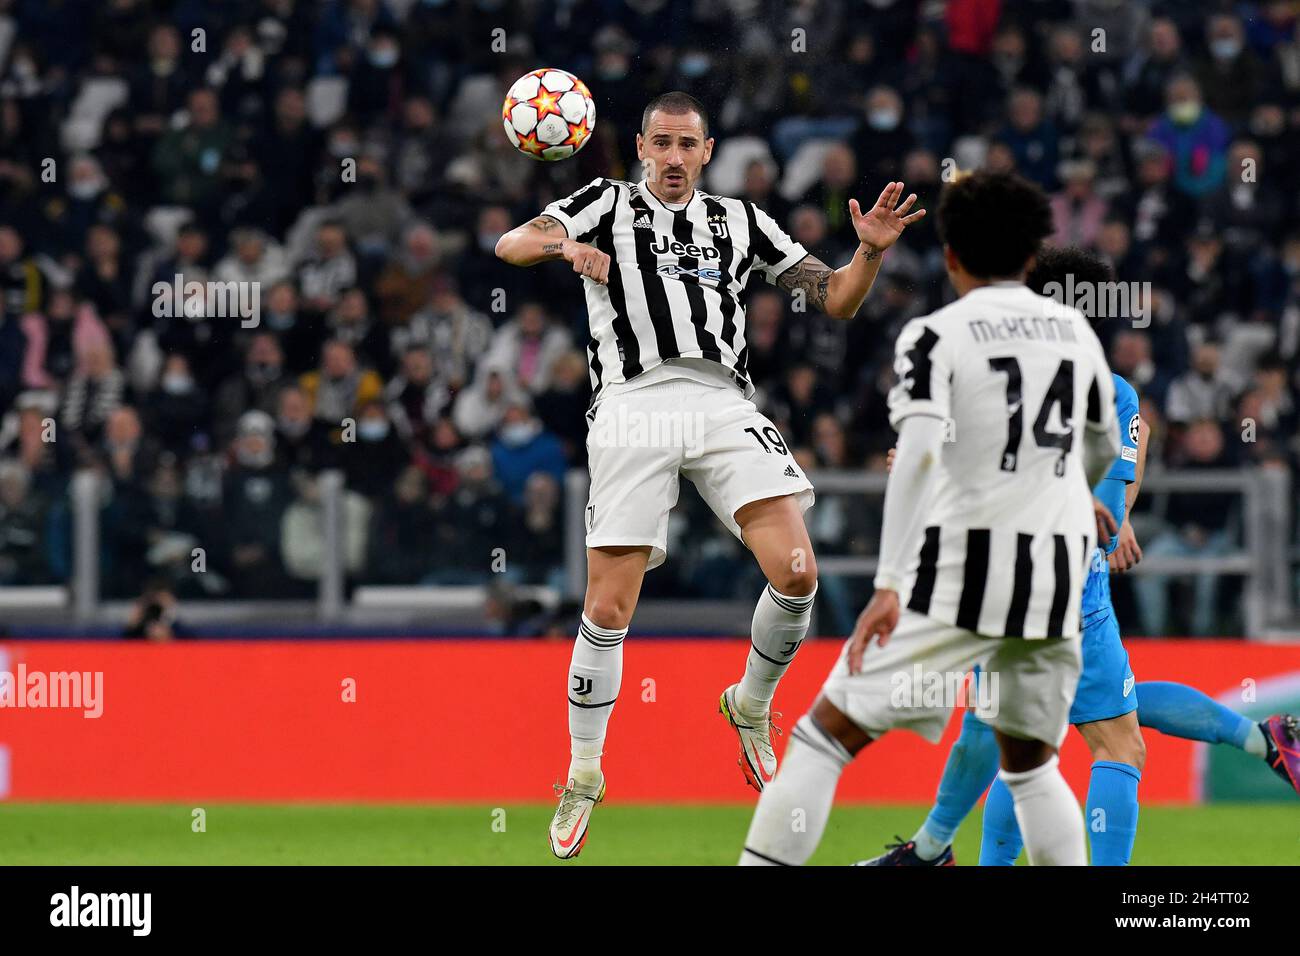 Turin, Italy. 02nd Nov, 2021. Leonardo Bonucci of Juventus FC in action during the UEFA Champions League 2021/22 Group stage-Group H football match between Juventus FC and Zenit FC at Juventus Stadium-Turin, Italy on October 02, 2021-Photo ReporterTorino Credit: Independent Photo Agency/Alamy Live News Stock Photo